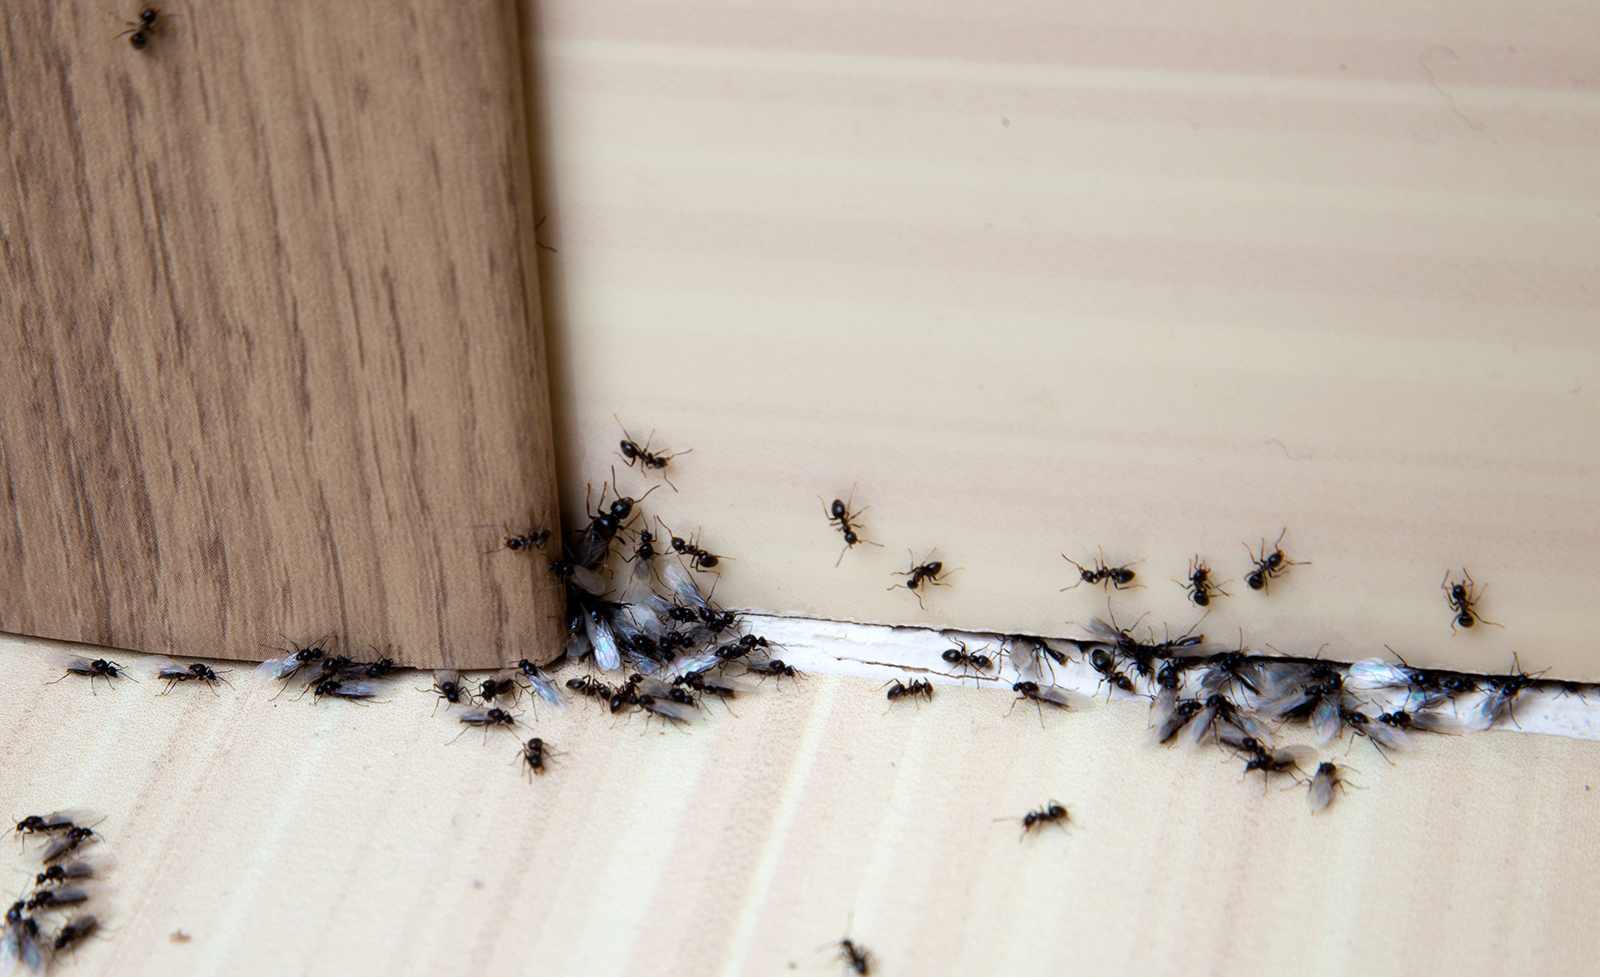 Will ants go to a dark or light area?